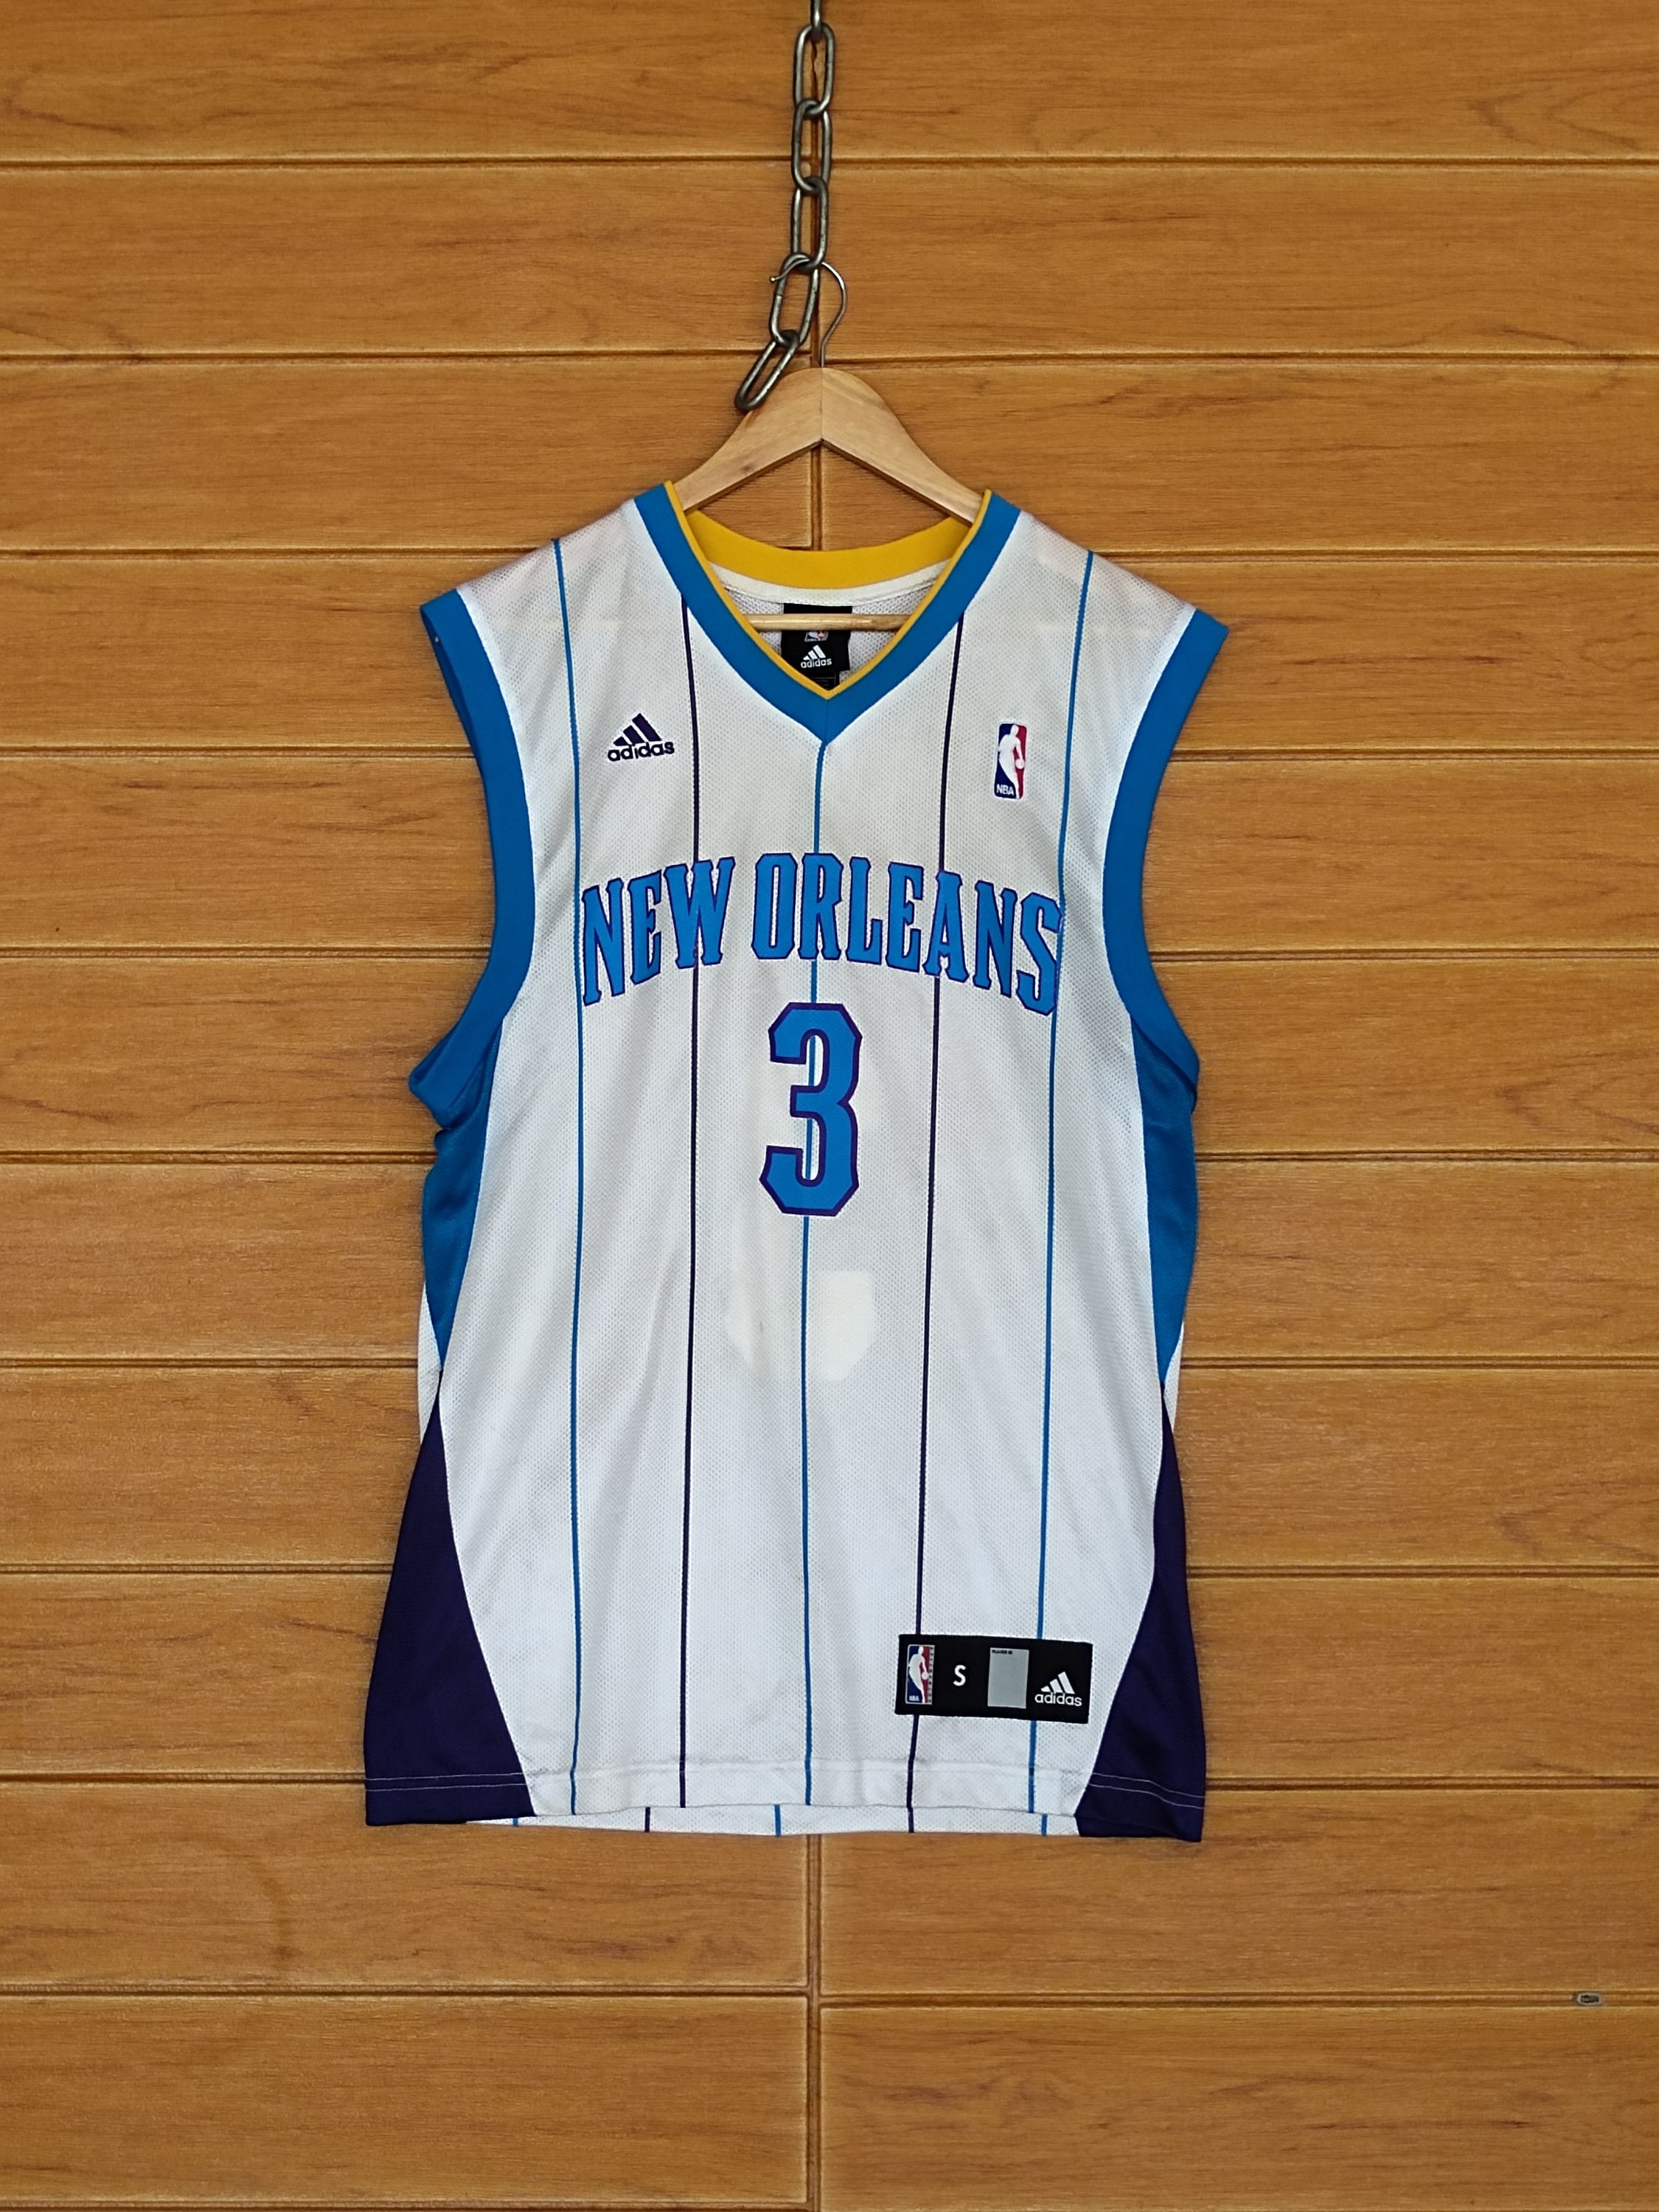 Looking for a chris paul throwback hornets jersey, in mens small